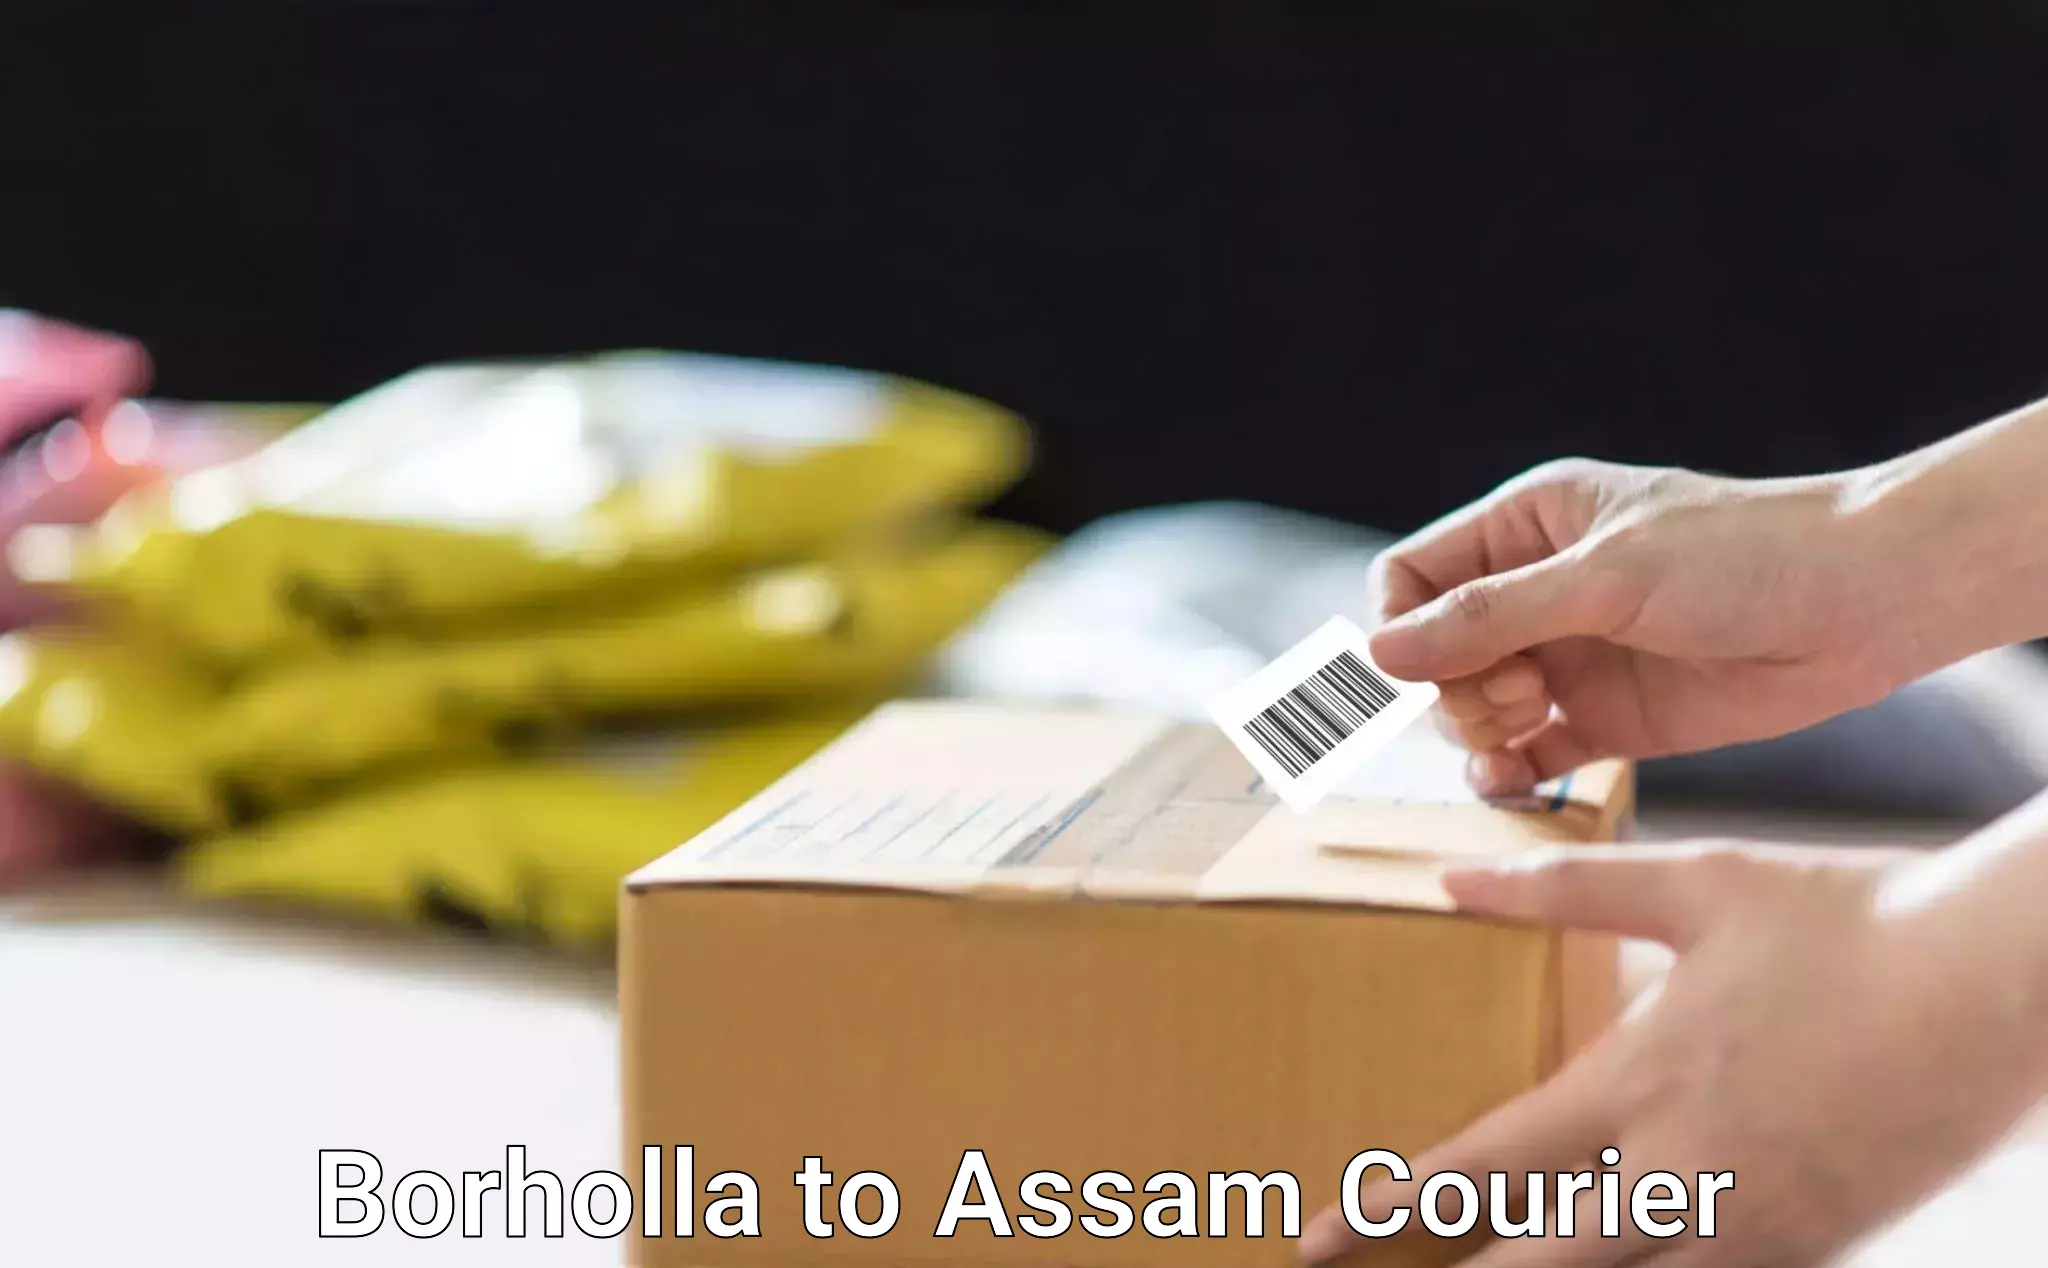 Flexible delivery scheduling Borholla to Assam